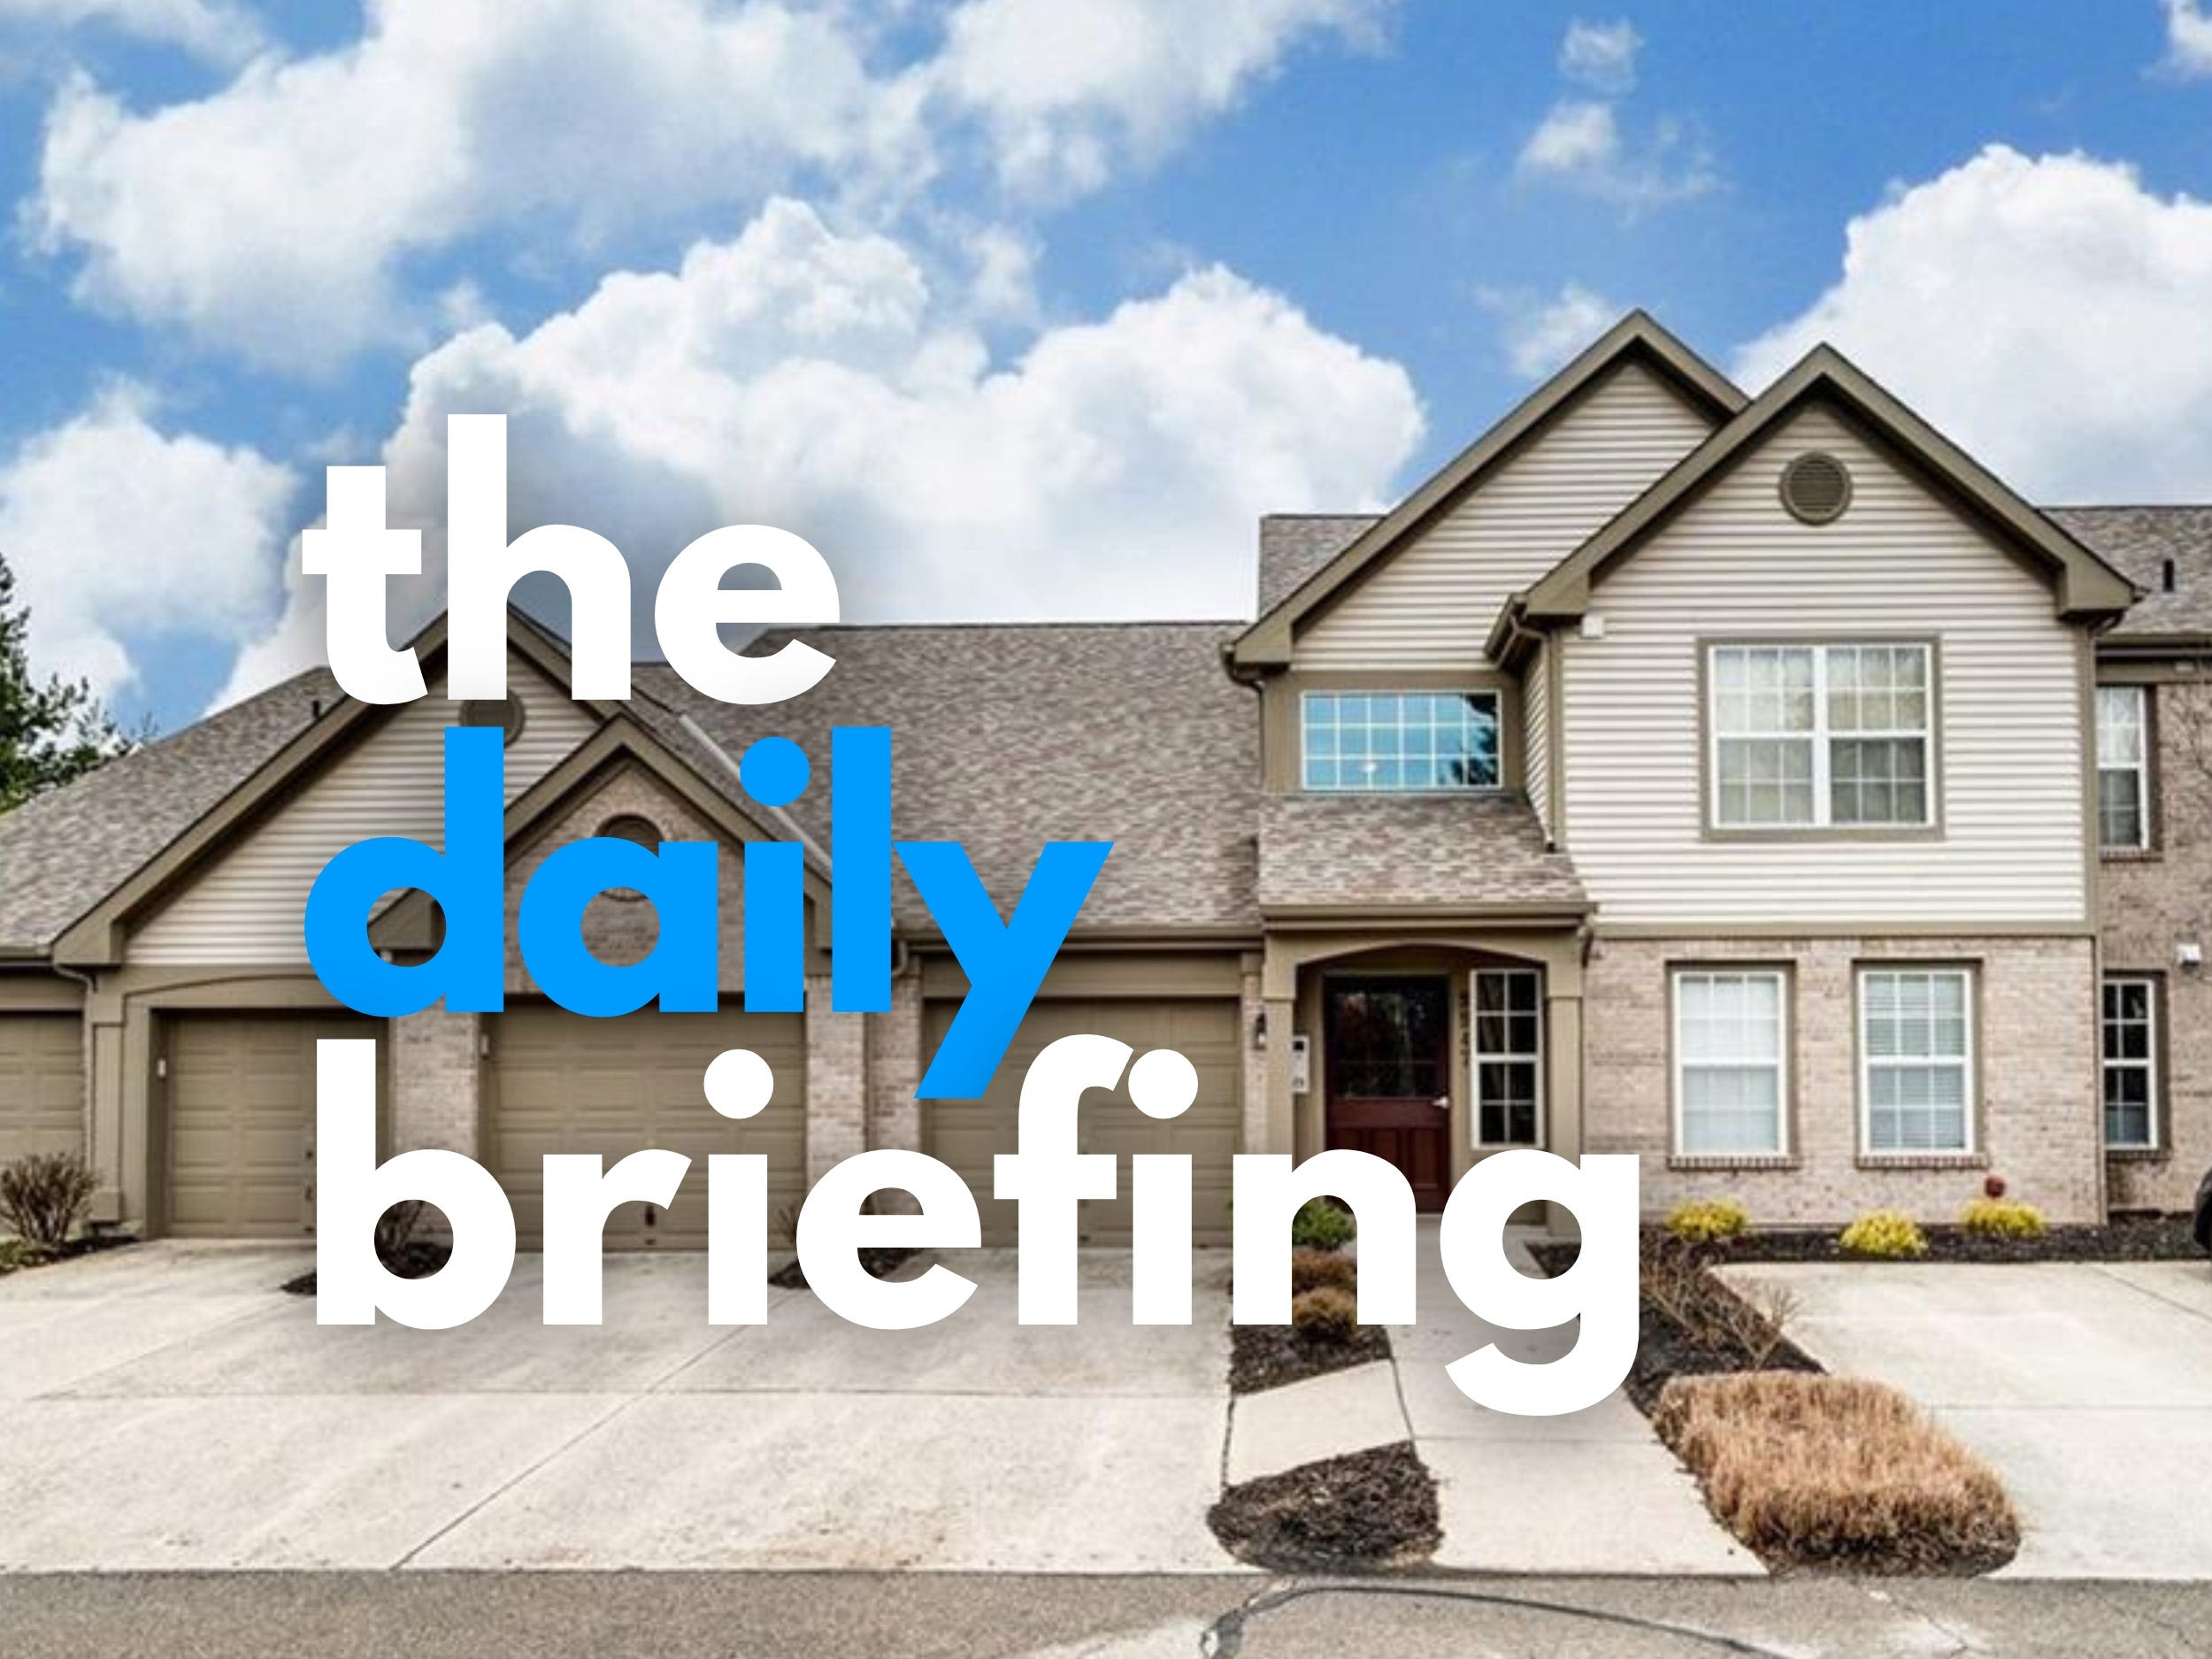 What's the hottest housing market in town? Here are today's top stories | Daily Briefing